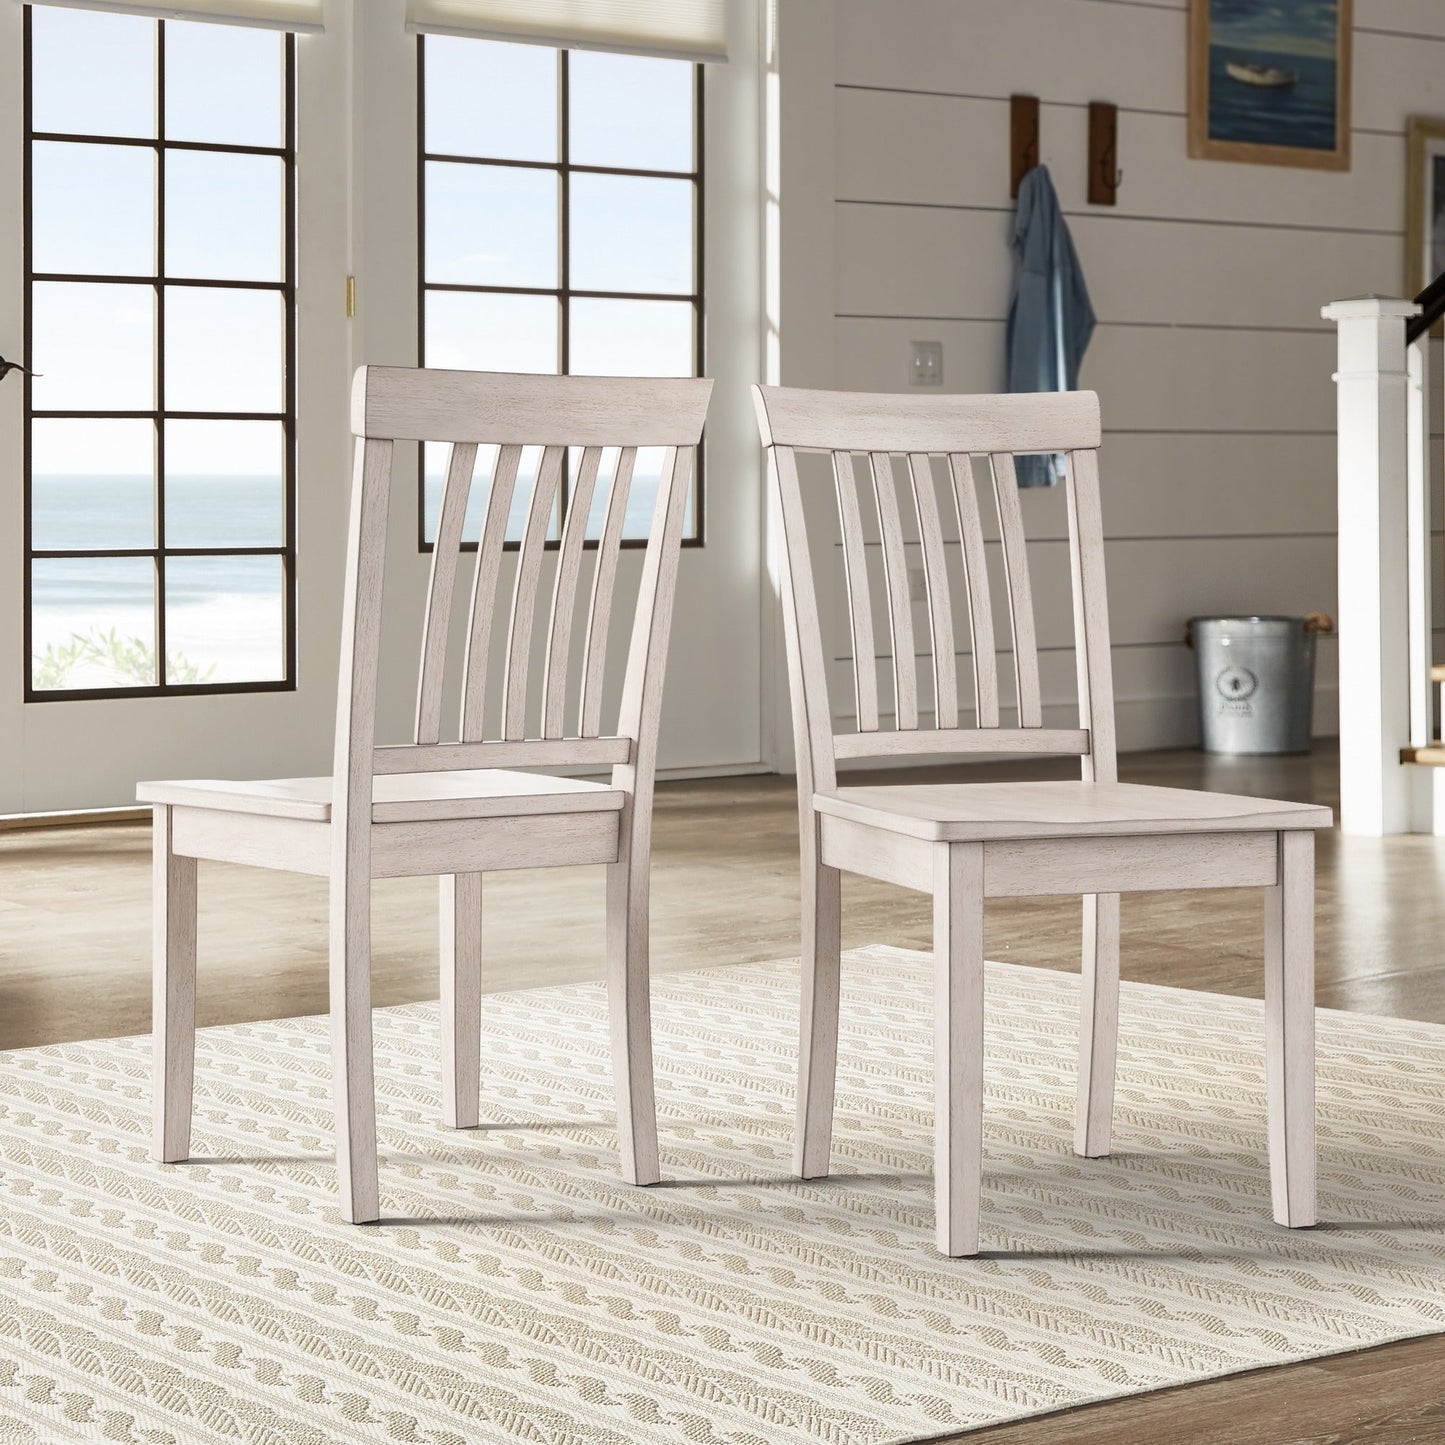 60-inch Rectangular Antique White Finish Dining Set - Mission Back Chairs, 6-Piece Set